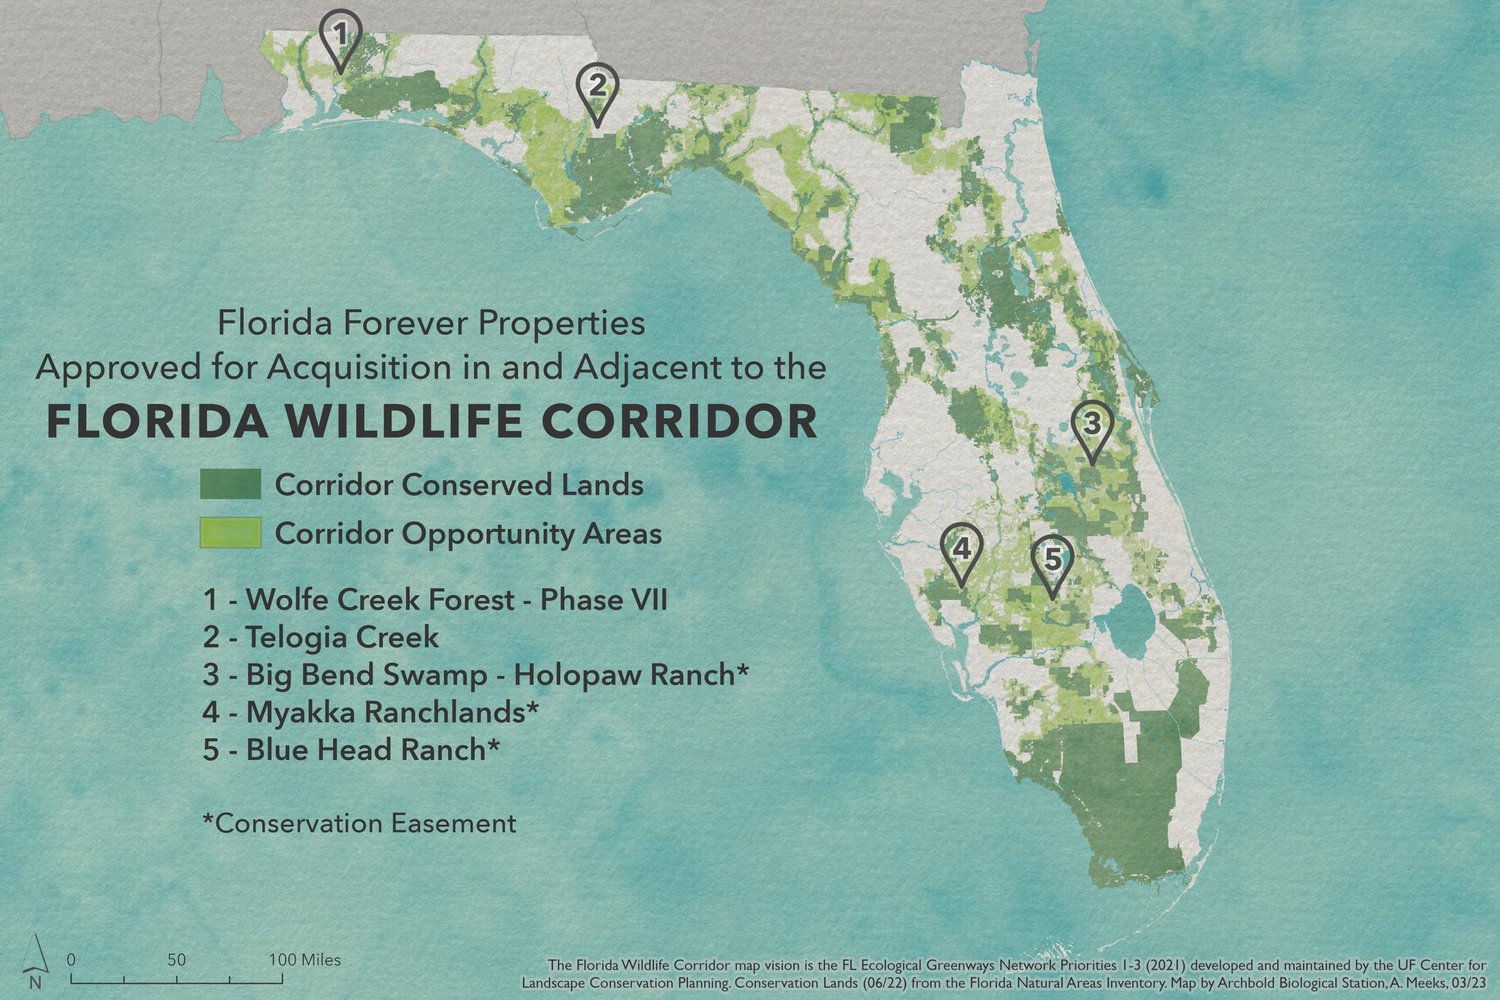 On March 13, the Florida Cabinet approved adding five properties to the Florida Wildlife Corridor.